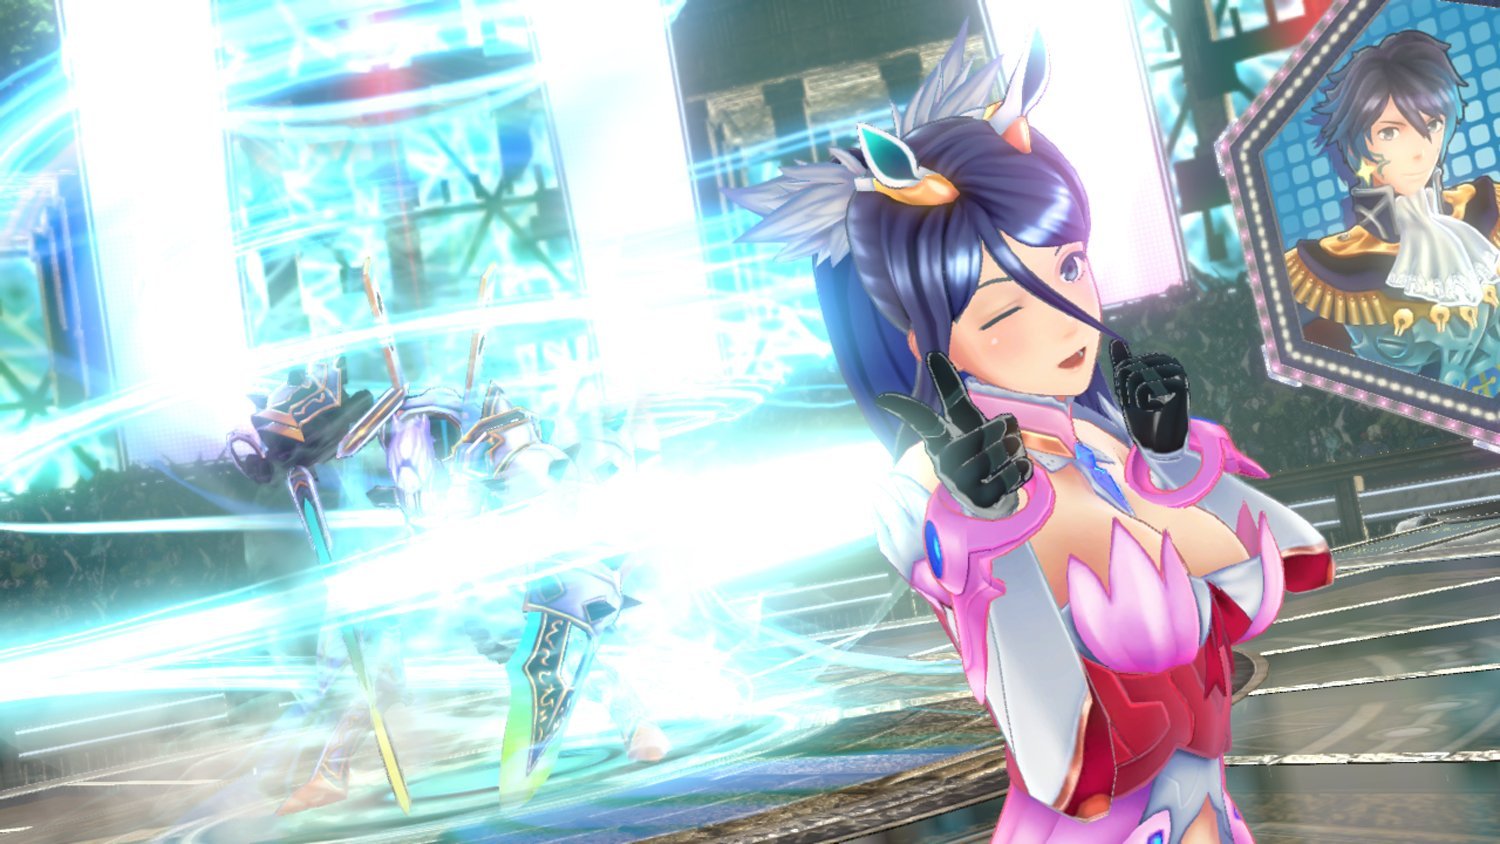 Tokyo Mirage Sessions #FE #16